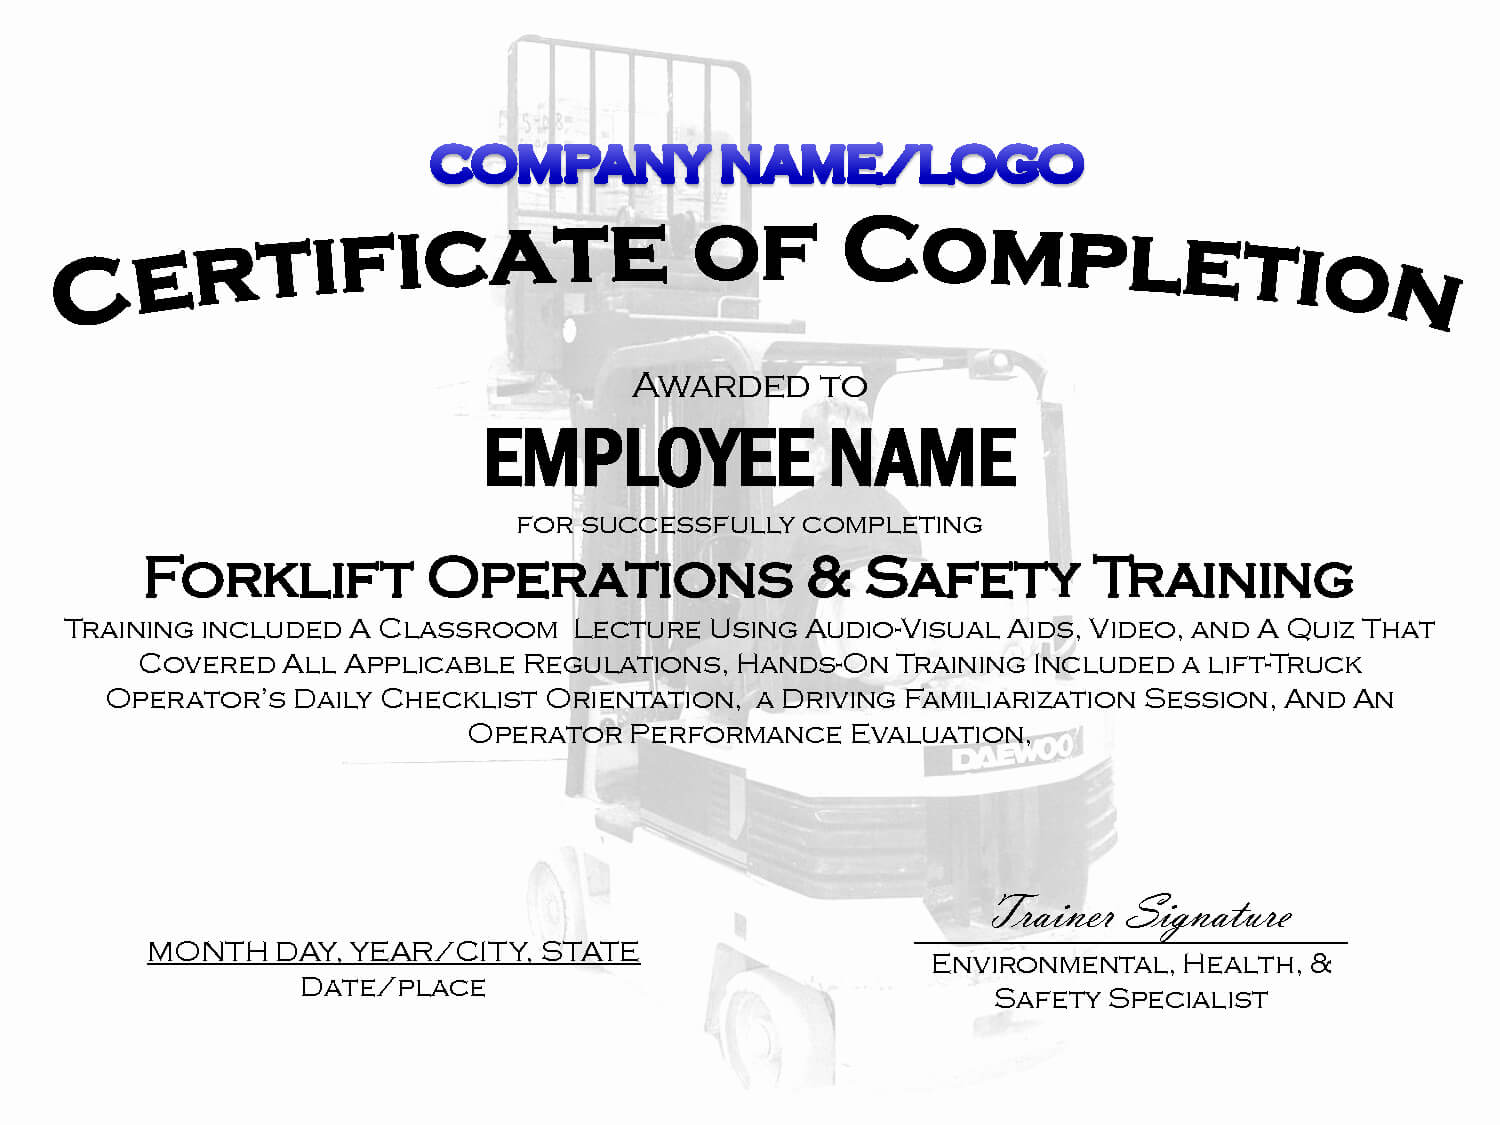 30 Forklift Operator Certificate Template Pryncepality in Safe